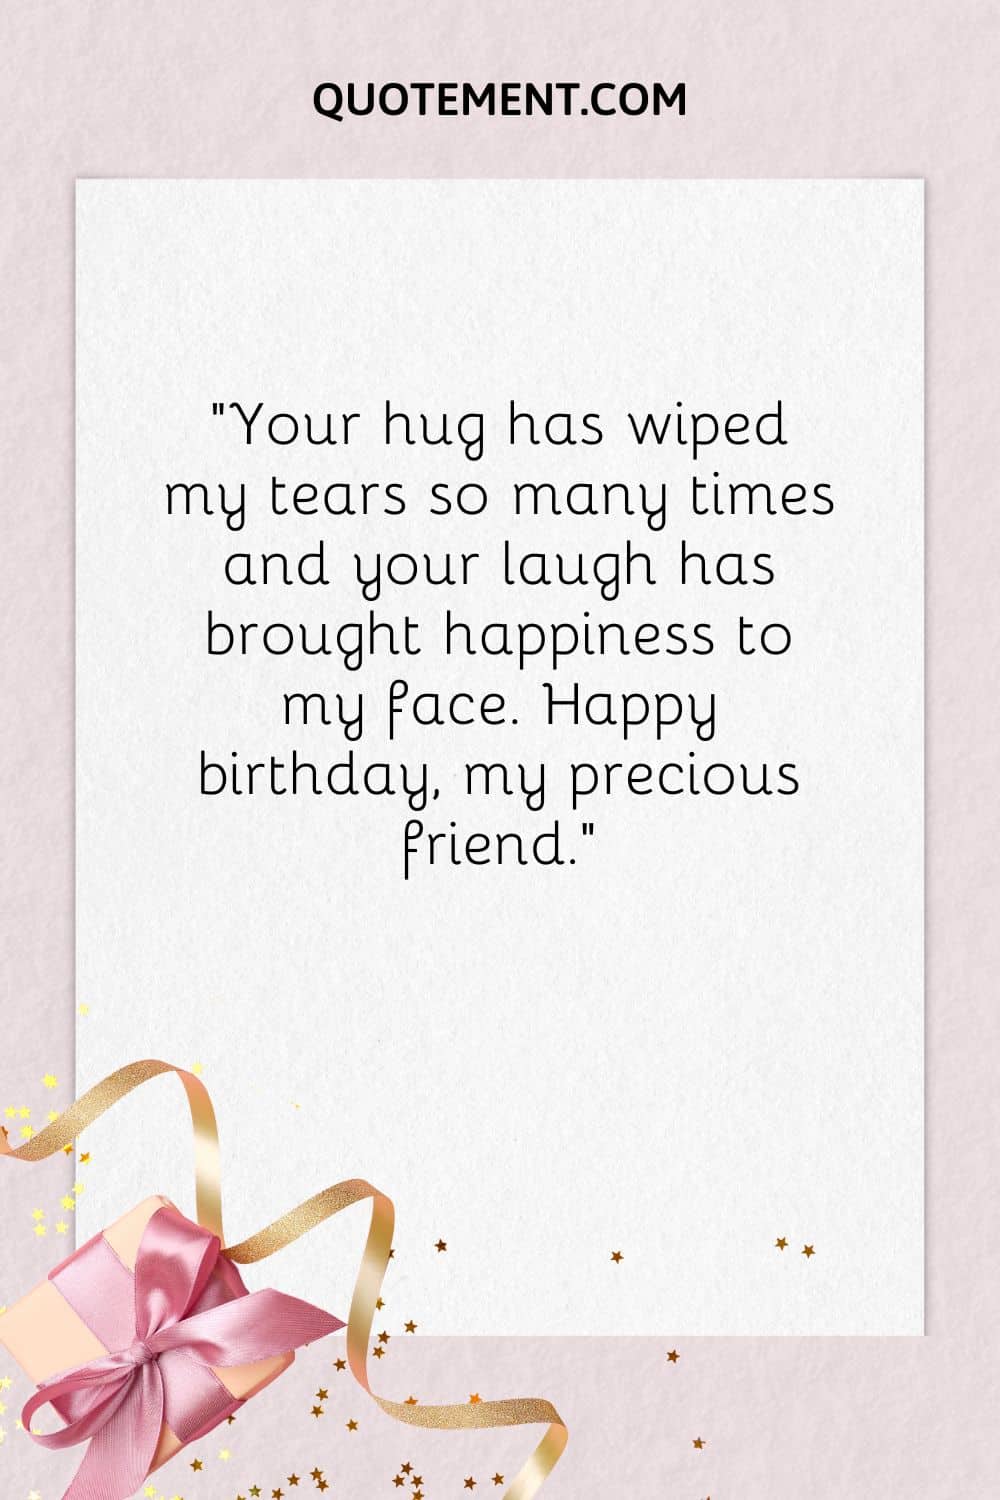 “Your hug has wiped my tears so many times and your laugh has brought happiness to my face. Happy birthday, my precious friend.”